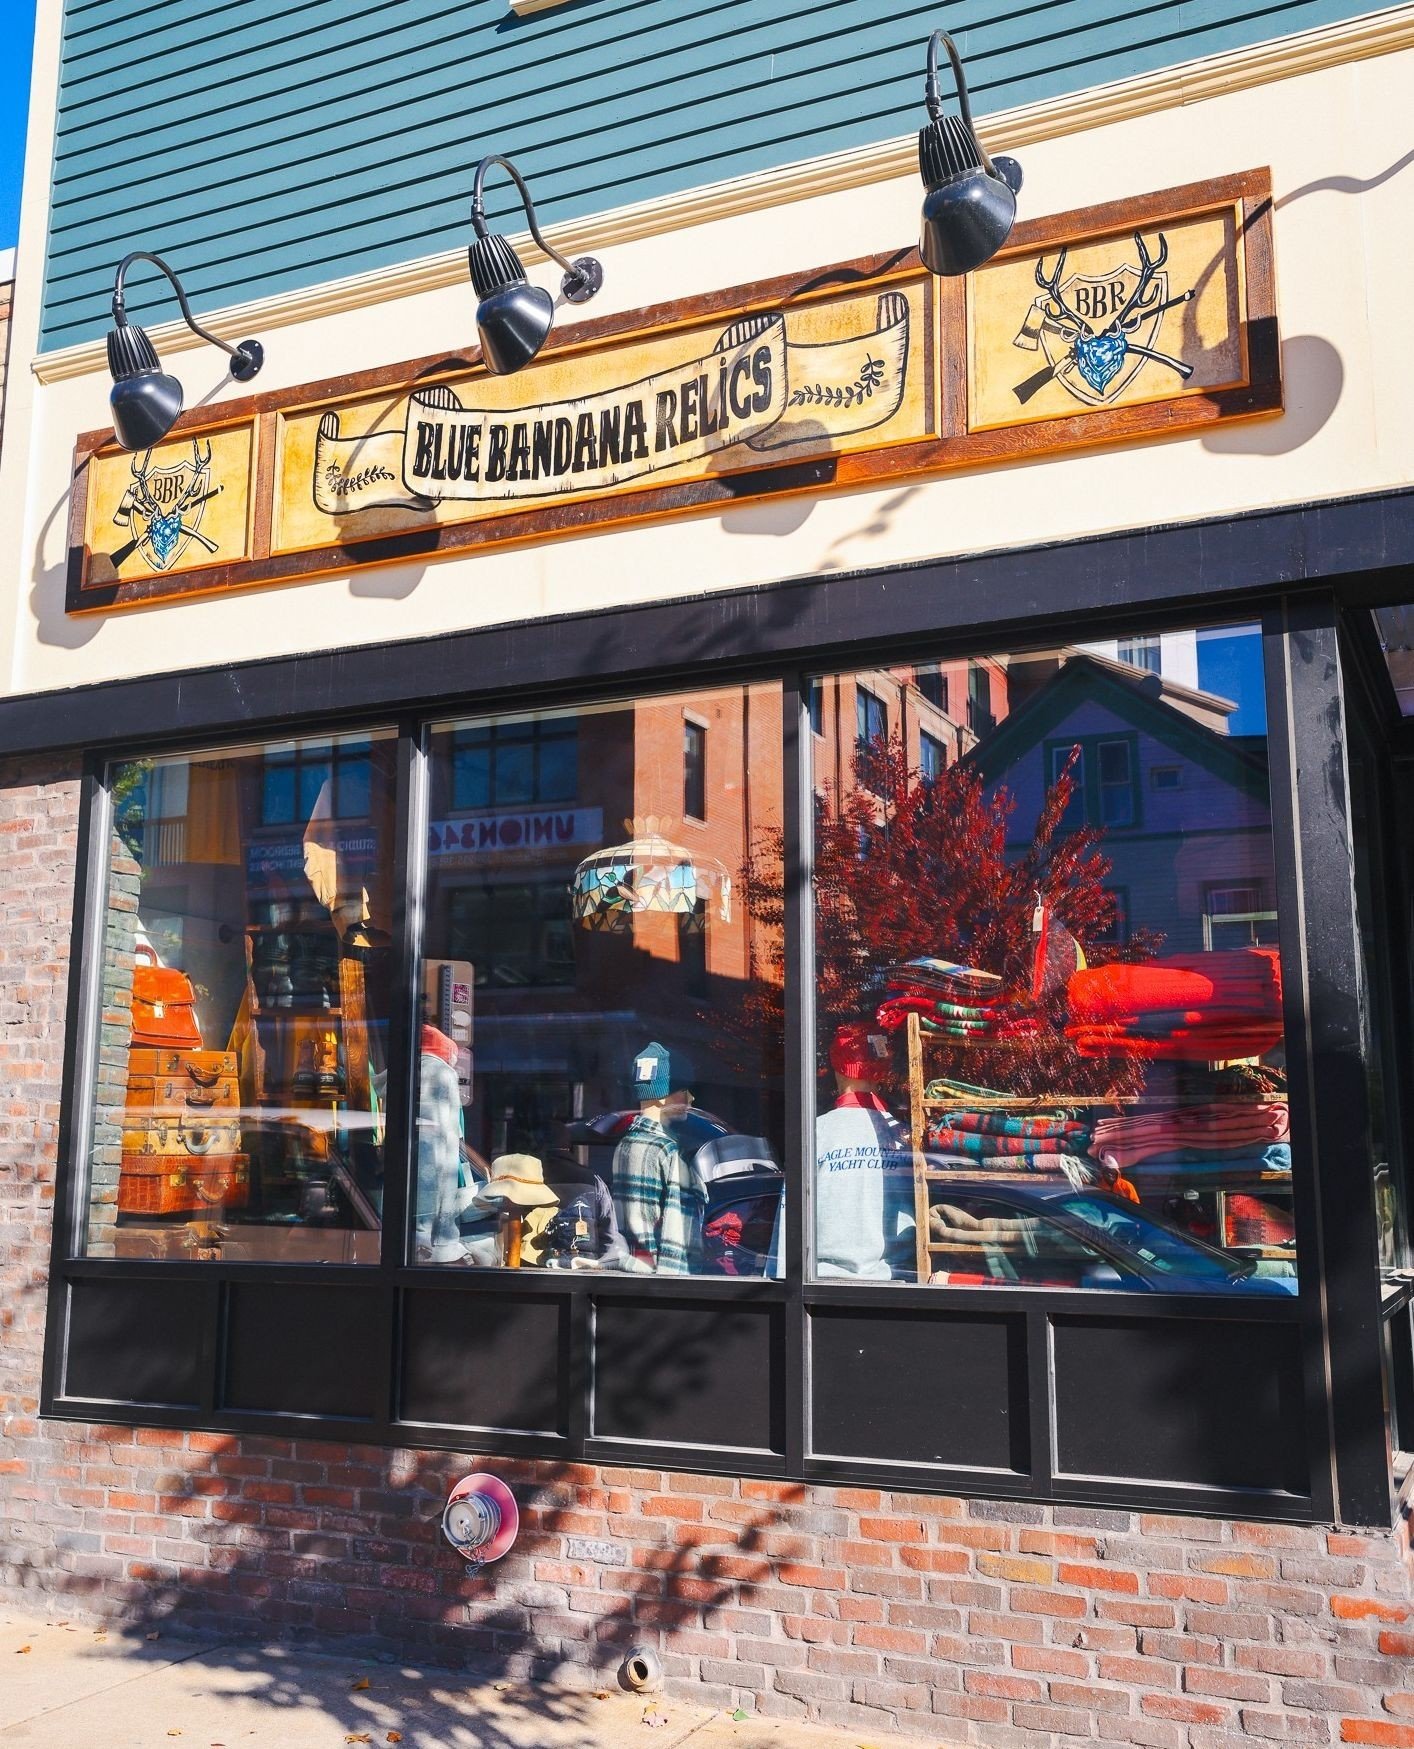 Have you checked out our extension yet? We have a new presence on Somerville Ave. @bluebandanarelics moved into our extension from the 2nd floor, along with some other Bow businesses. Keep an eye out for a couple more openings in the extension this s